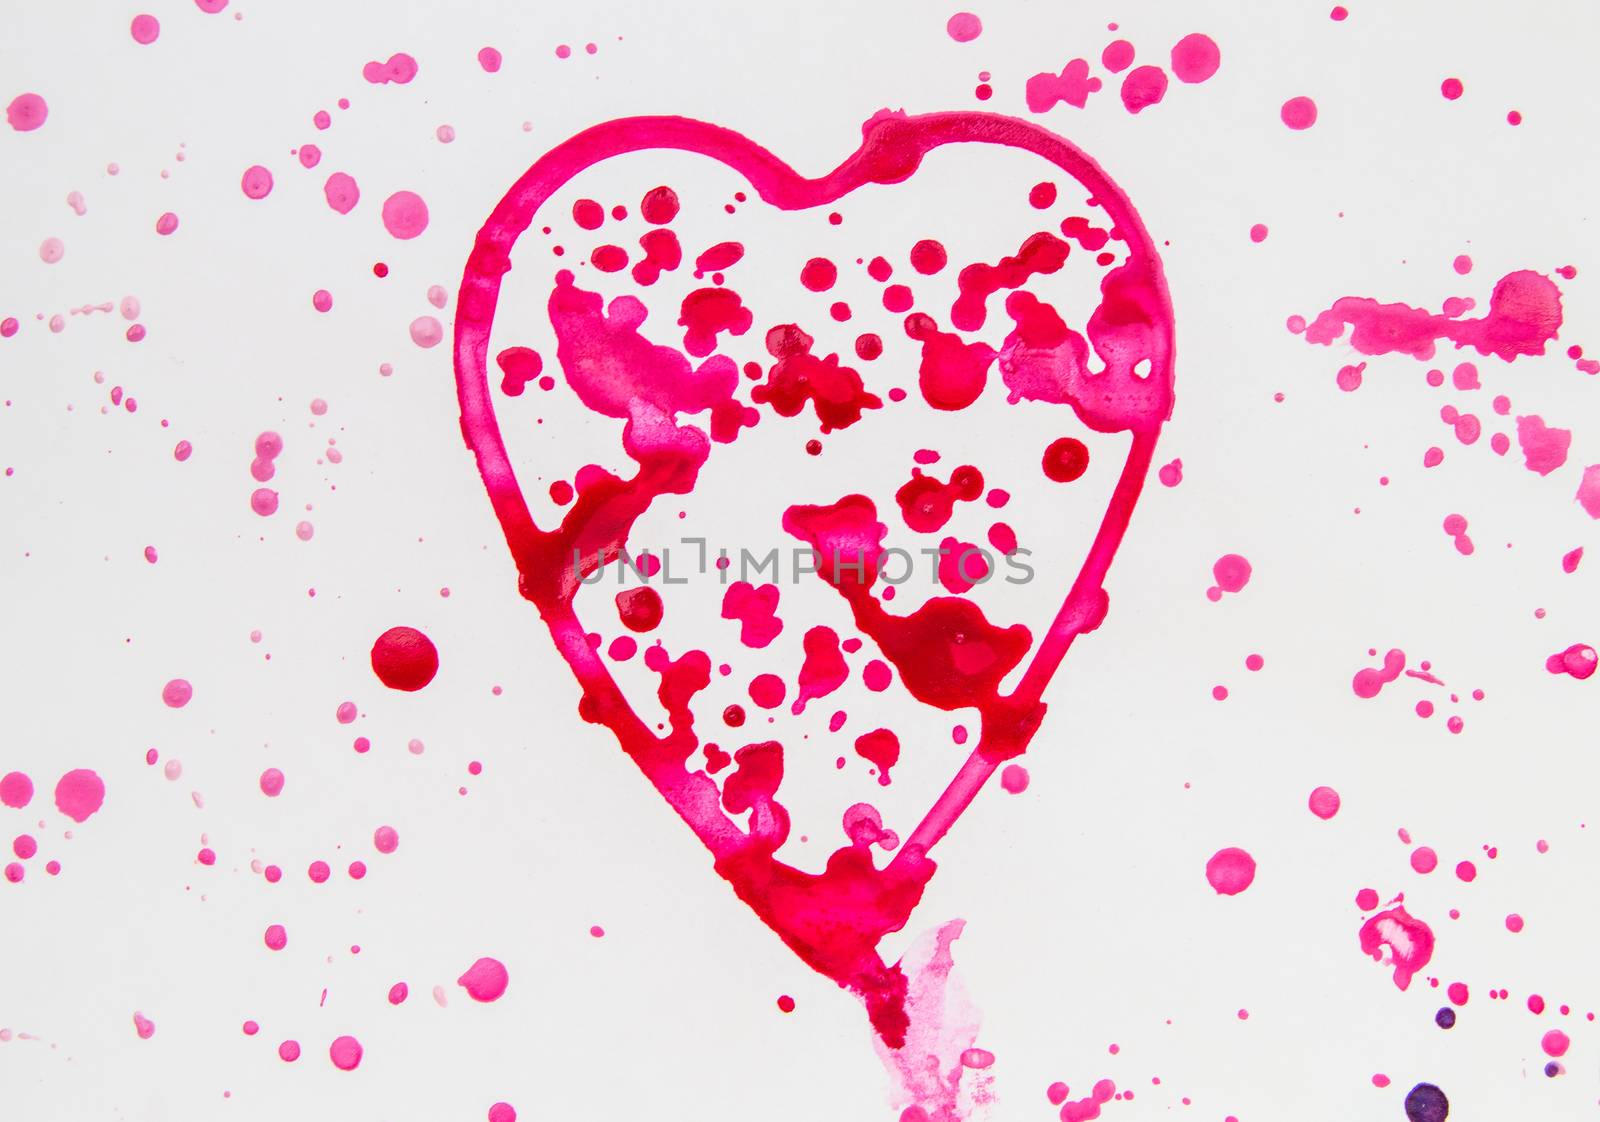 Heart with splashes of red watercolor on white background, cute, pattern, hand-painted.